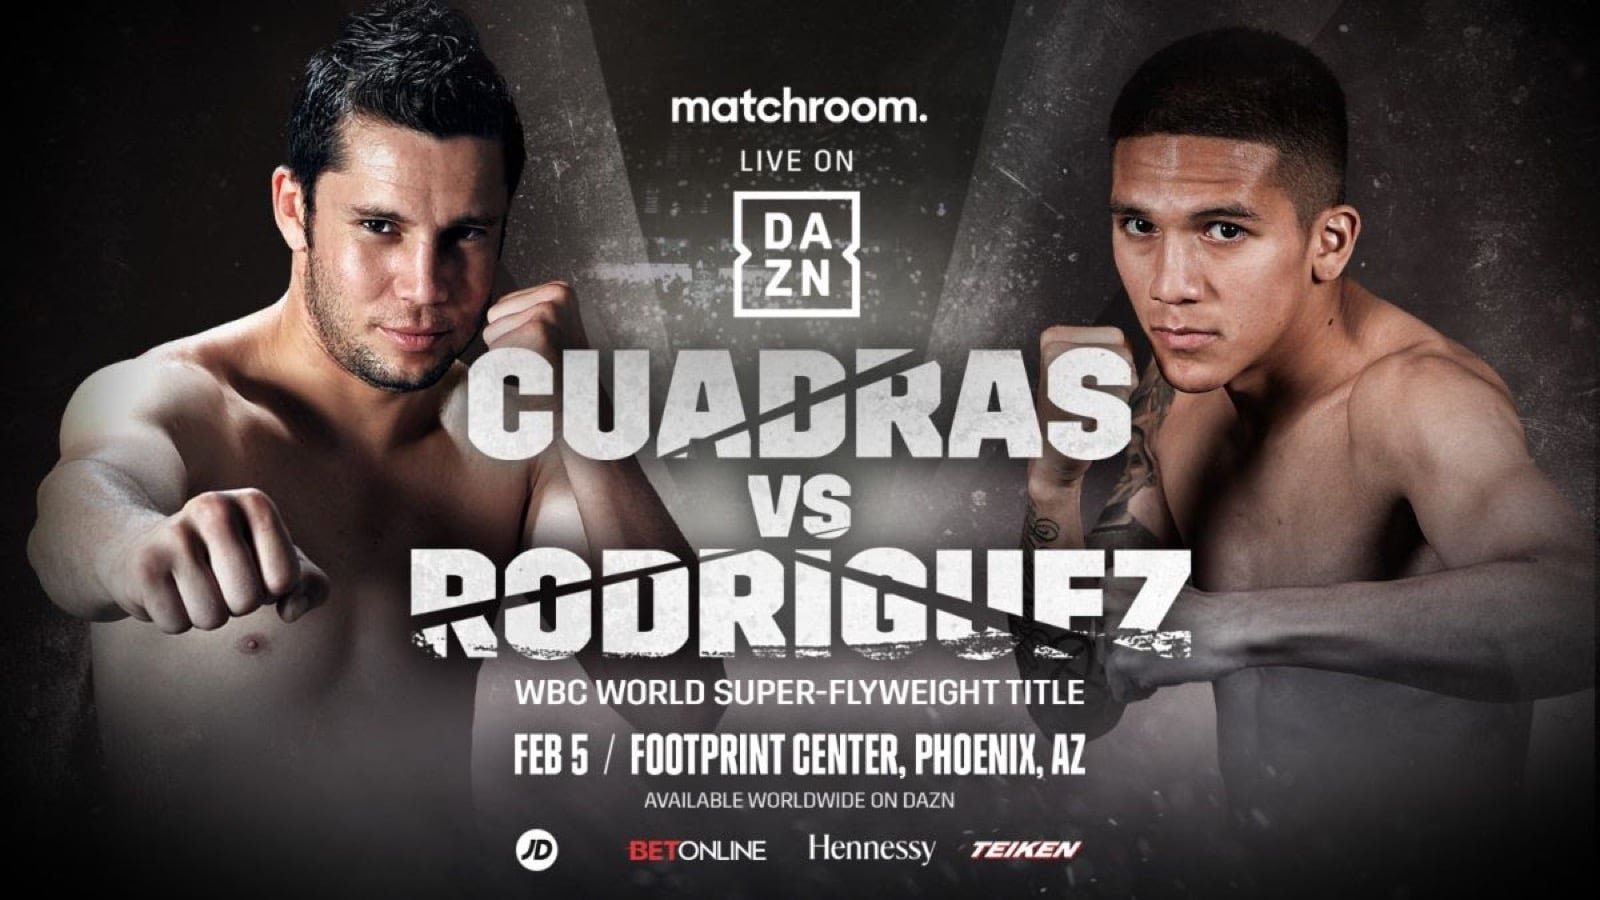 Two Texans take a Huge Step Up on DAZN Card — Texas Boxing Scene